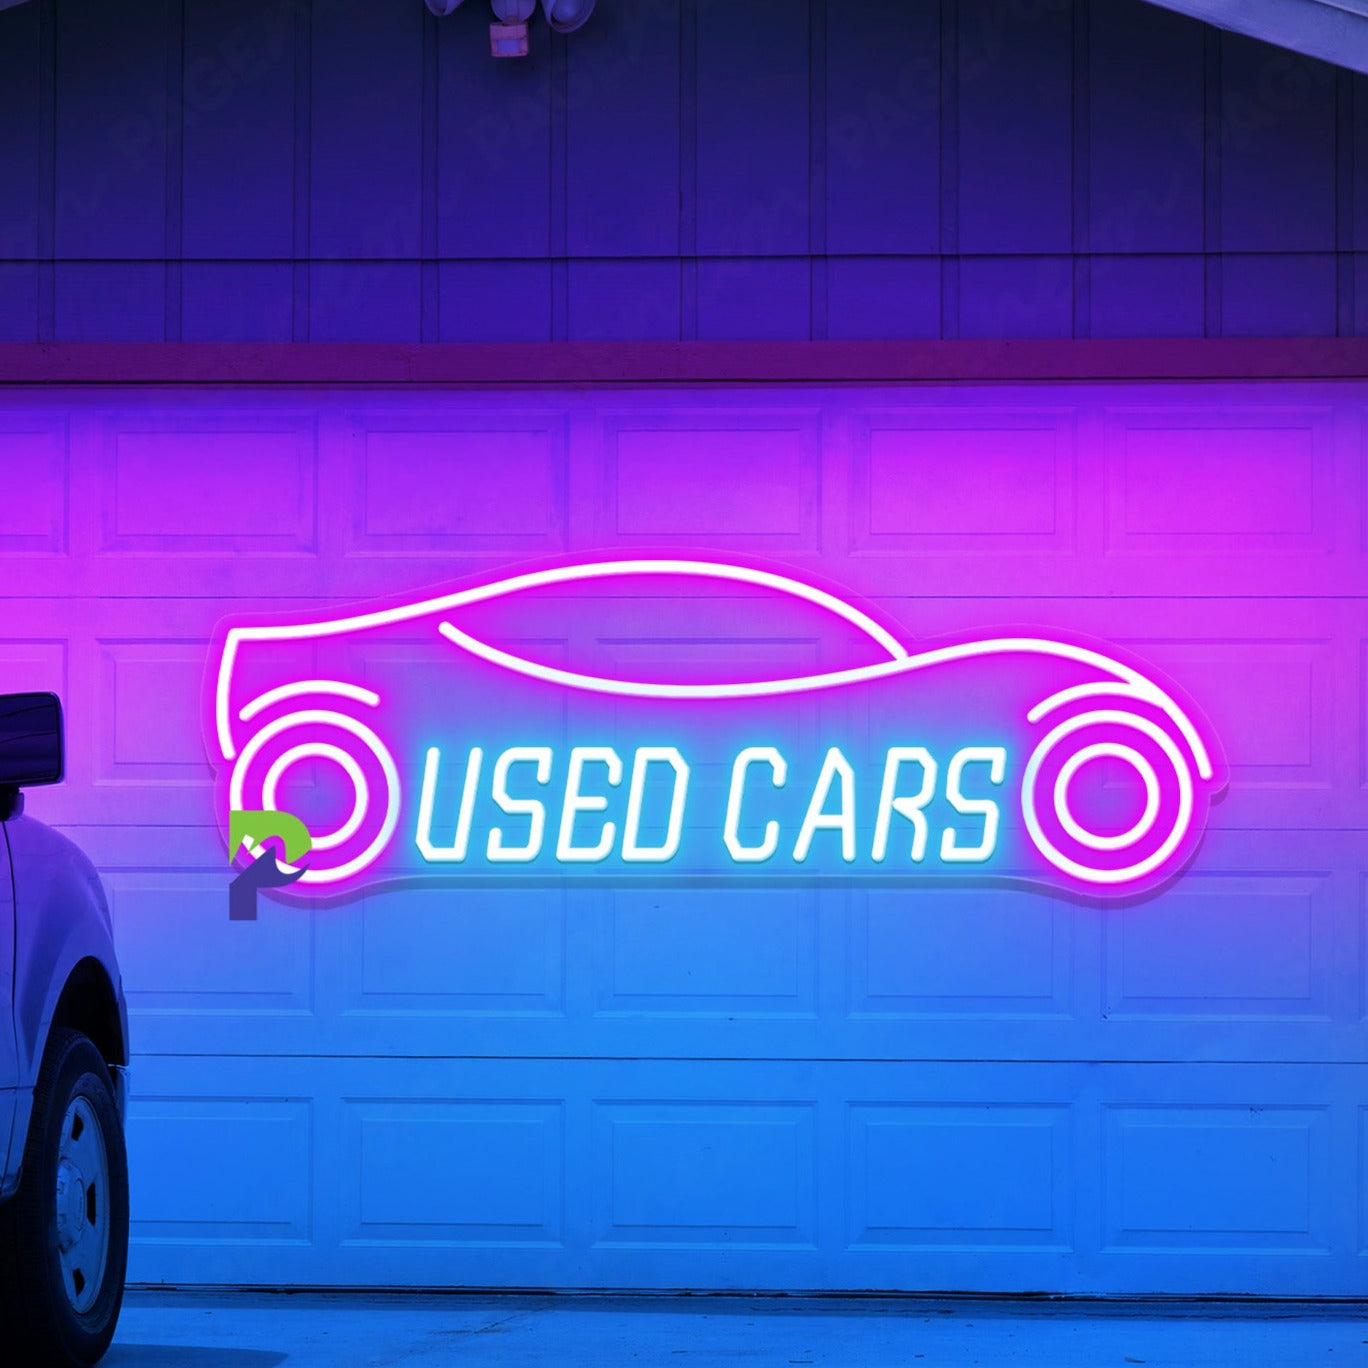 Used Cars Neon Sign Led Light For Garage